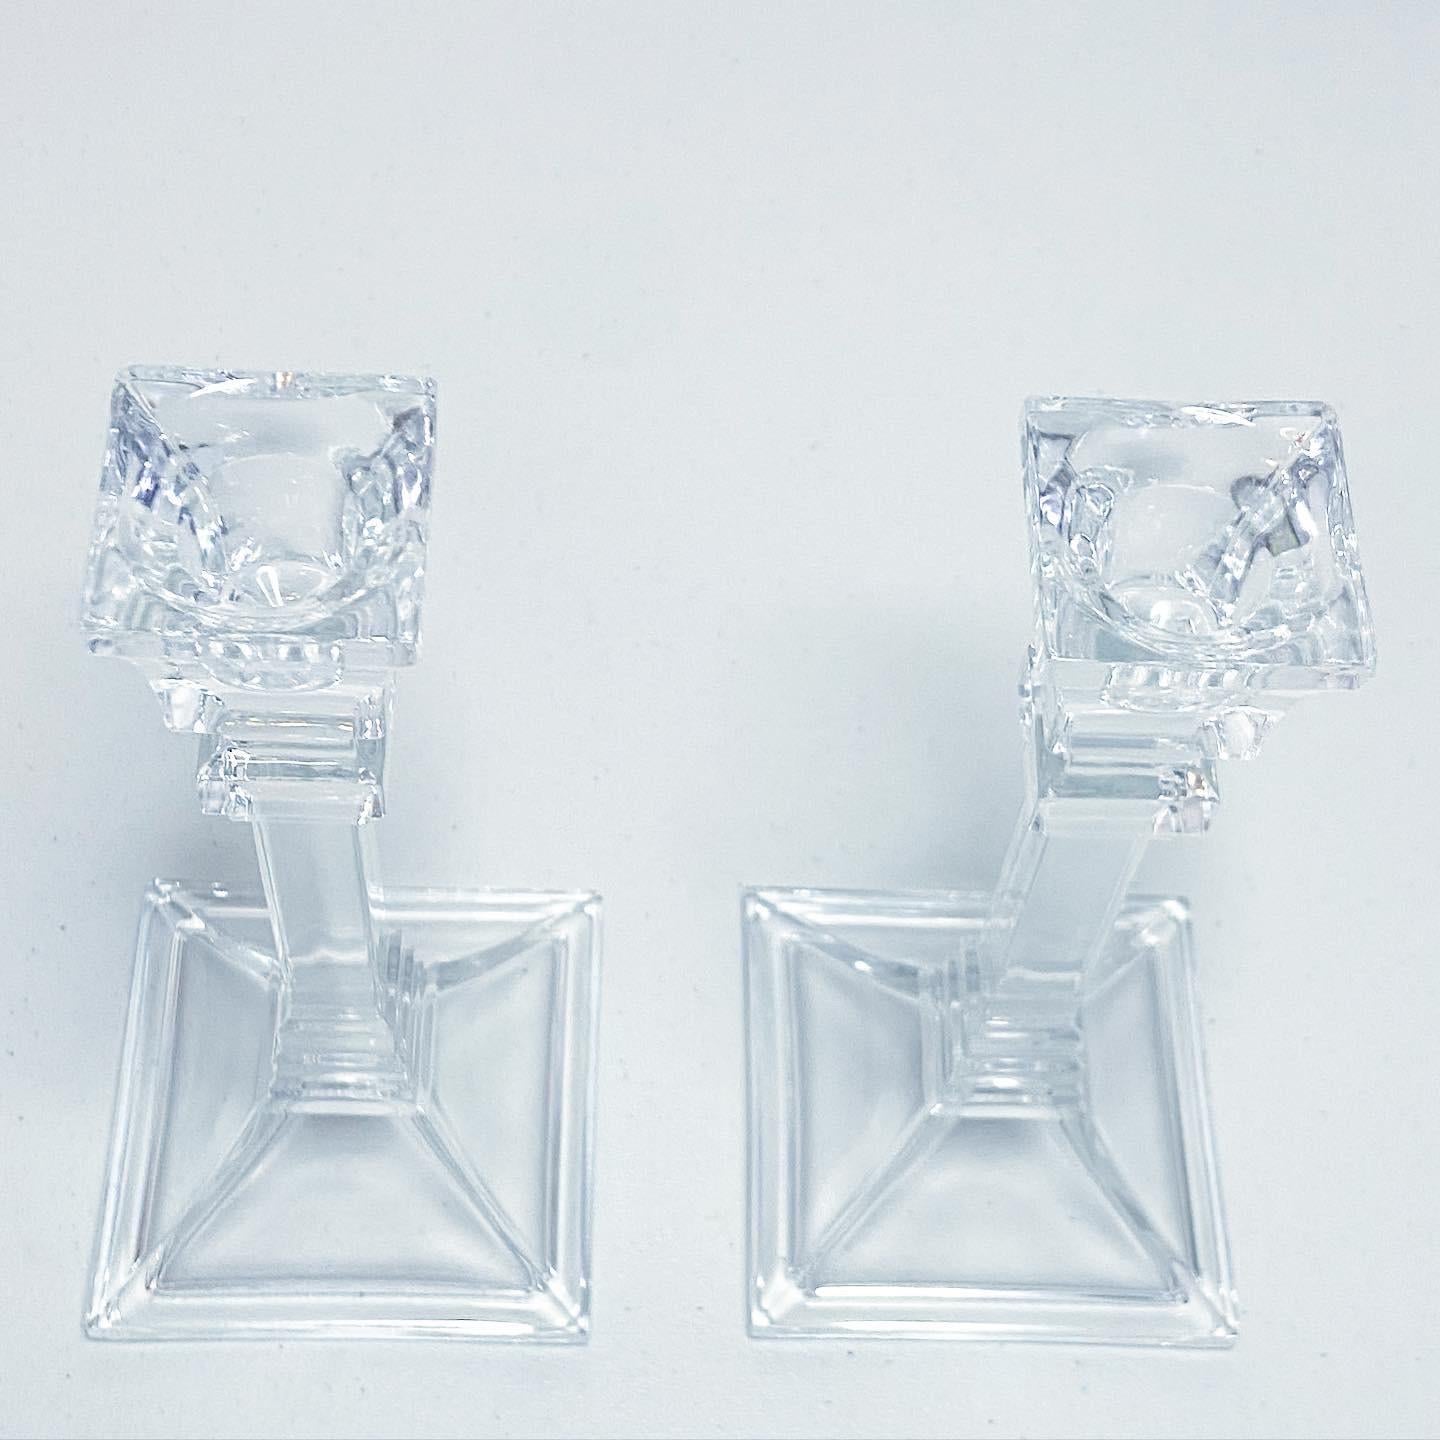 Incredible pair of crystal clear glass candle holders.
